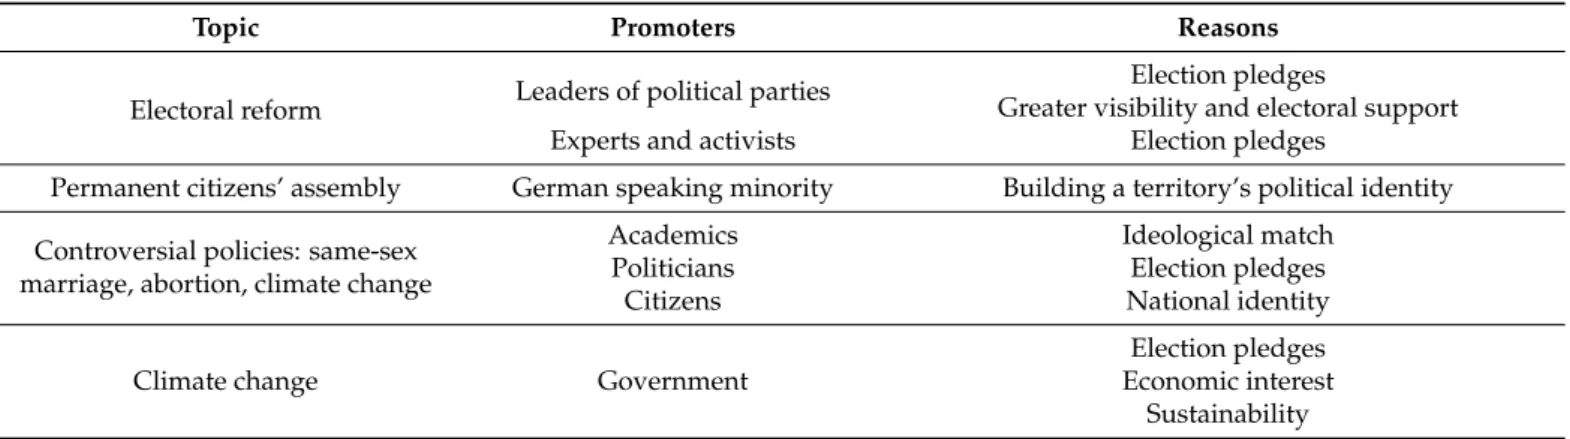 Table 1. The Promoters of Citizens’ Assemblies and the Main Reasons Behind Them.